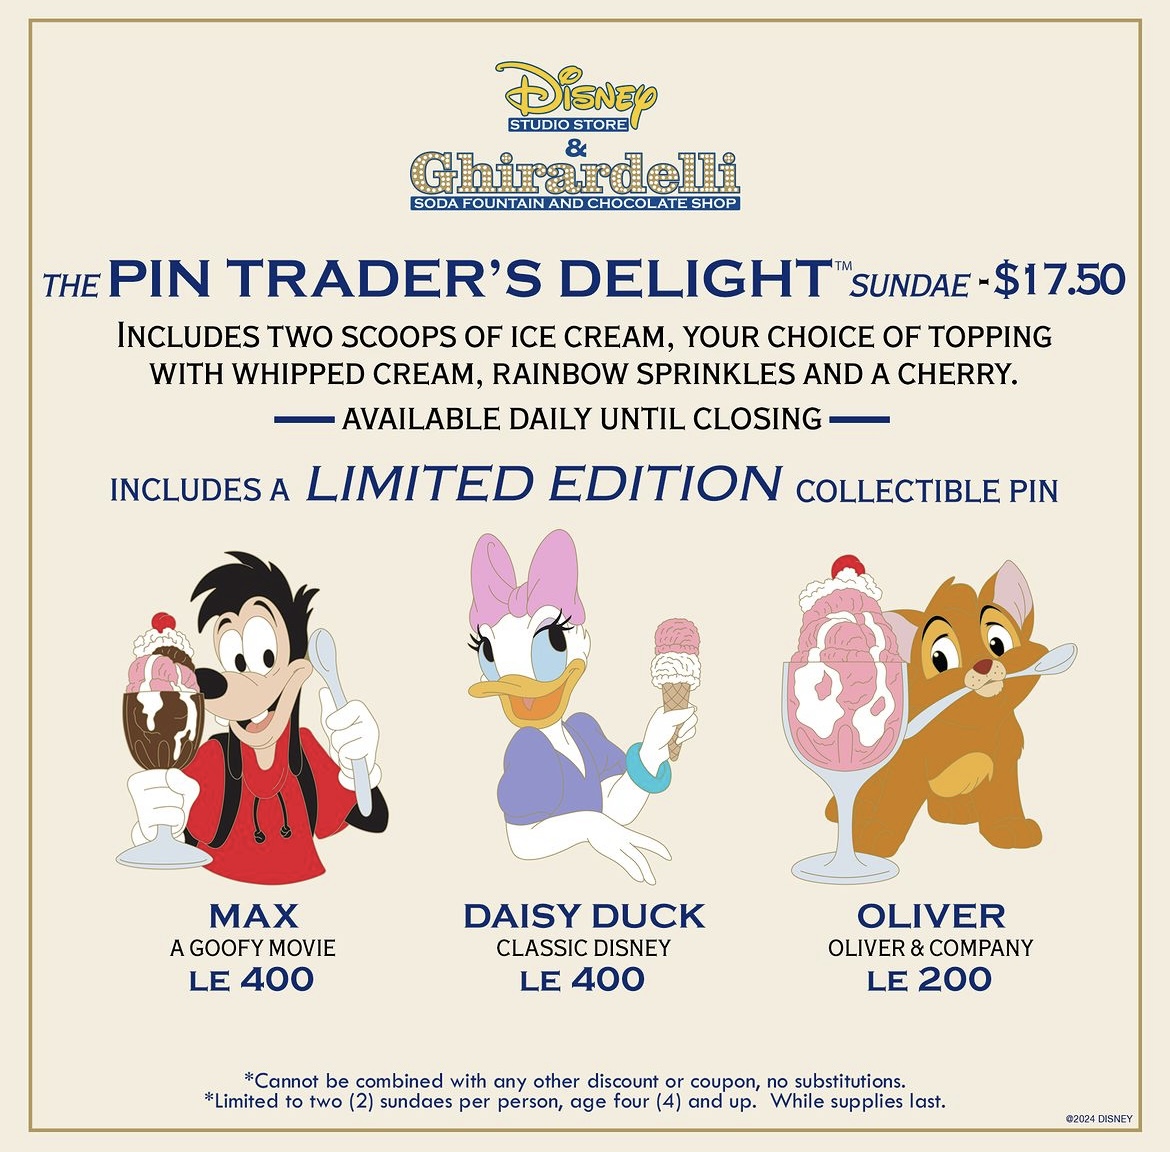 Today, the Disney Studio Store in Hollywood dropped the May Pin Trader's Delight Limited Edition sundae pins. 
#Disney #DisneyMerchandise #DisneyMovies #DisneyPinTrading #DisneyPins #TheWaltDisneyStudios
disneymouseketeer.com/disney-studio-…